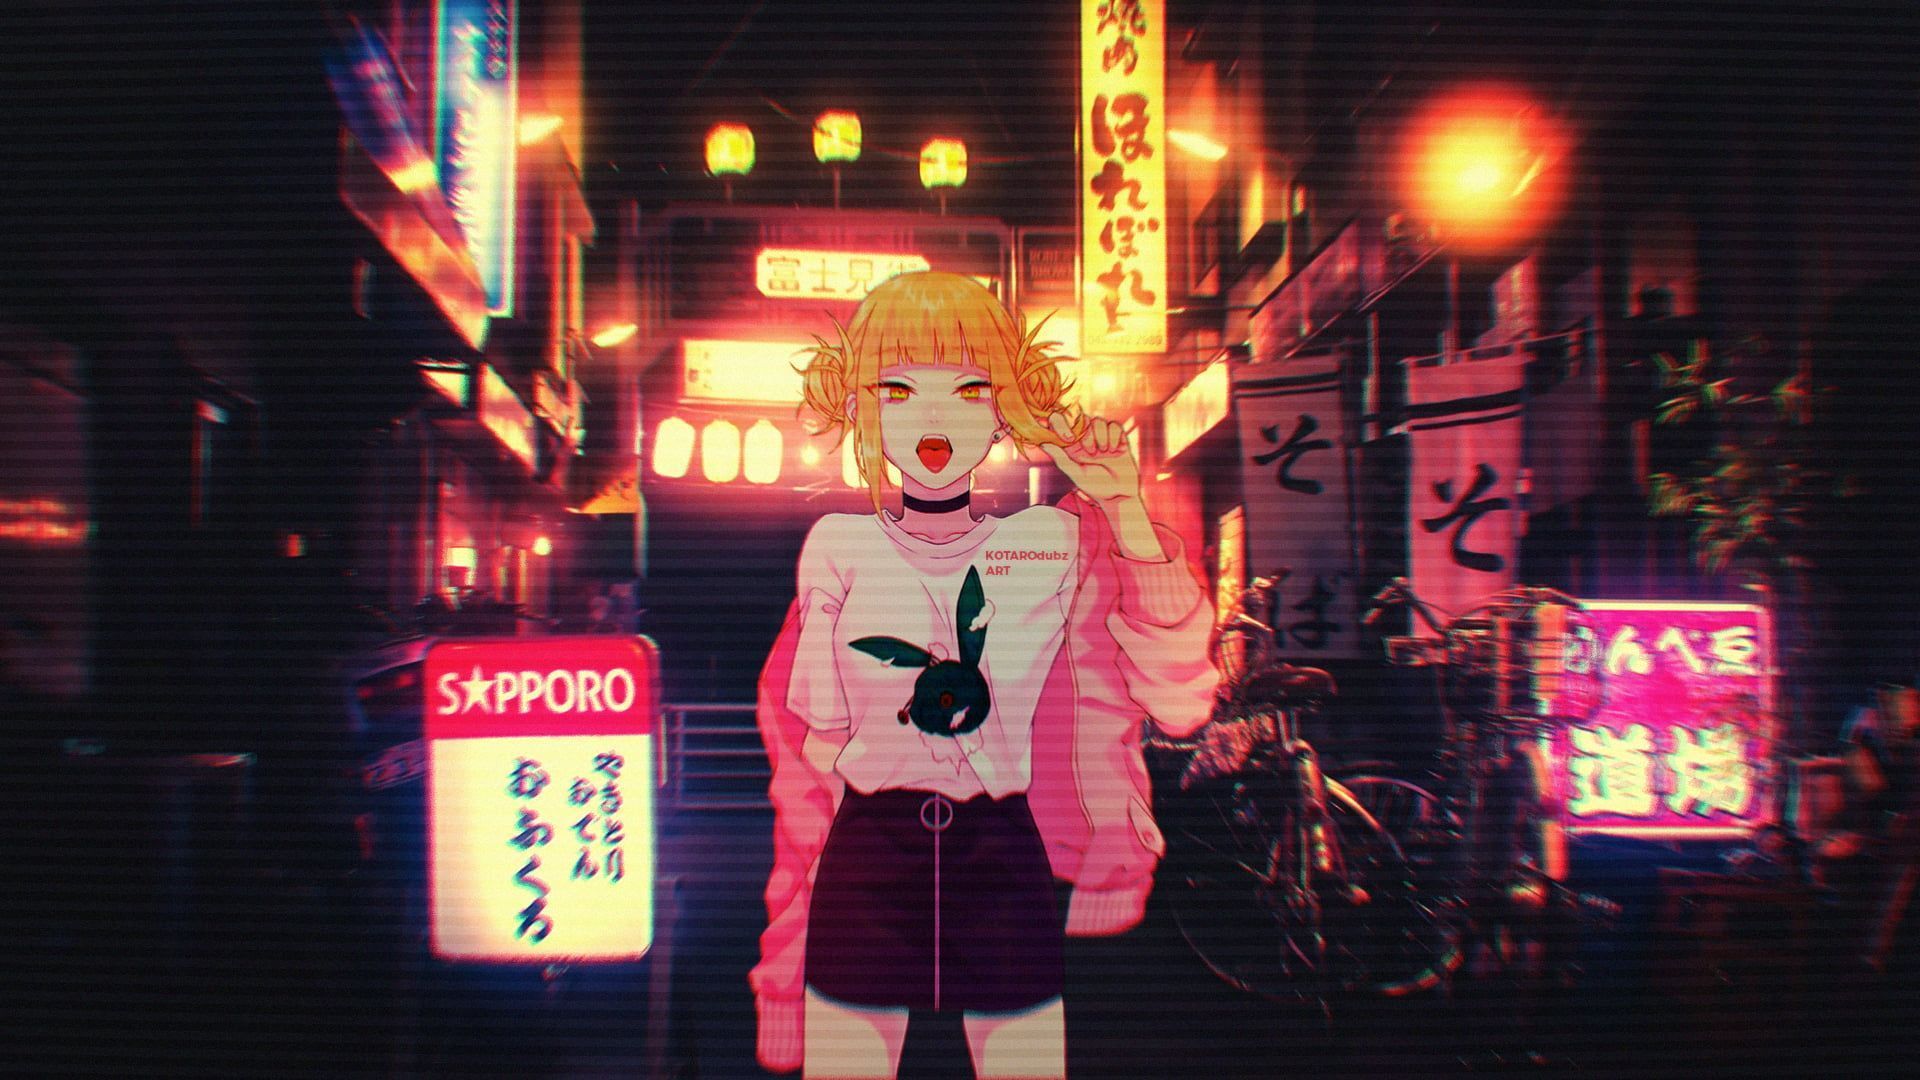 Anime Wallpaper, Anime Girls, Simple, Simple Background, Glitch Art, VHS